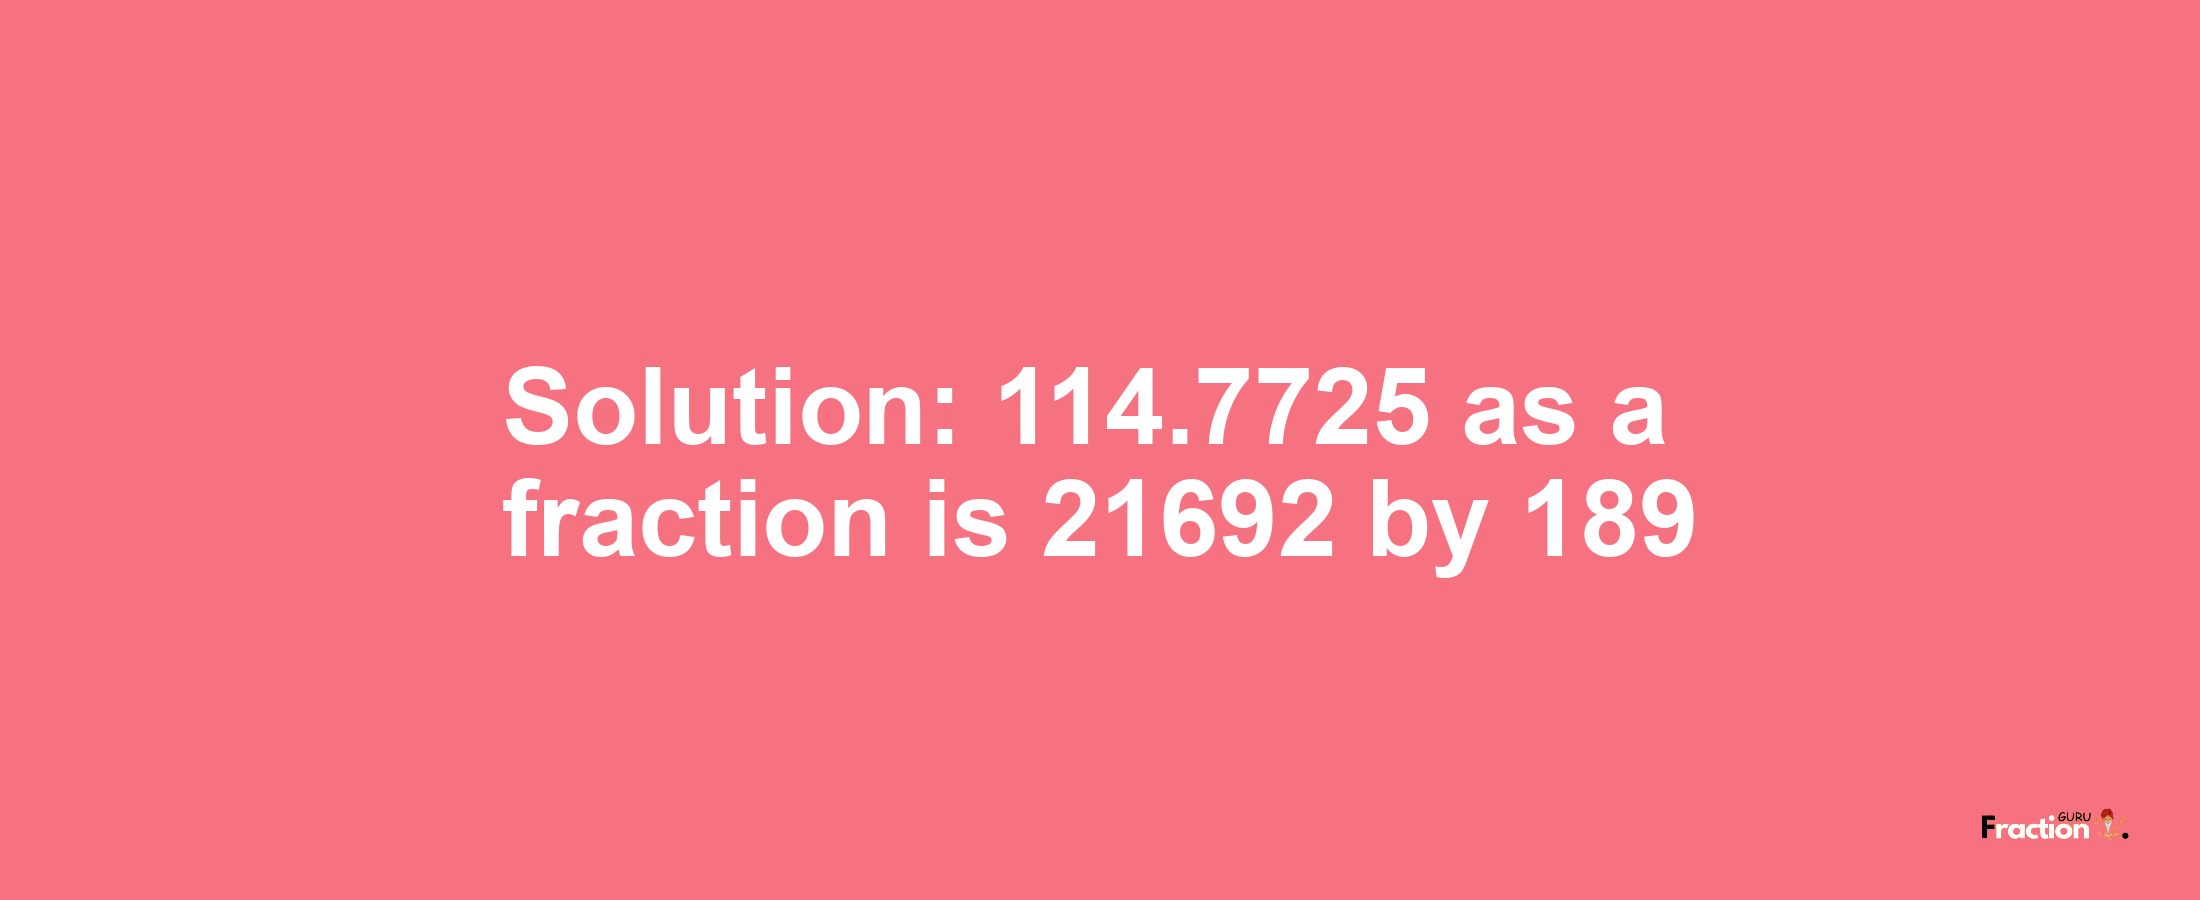 Solution:114.7725 as a fraction is 21692/189